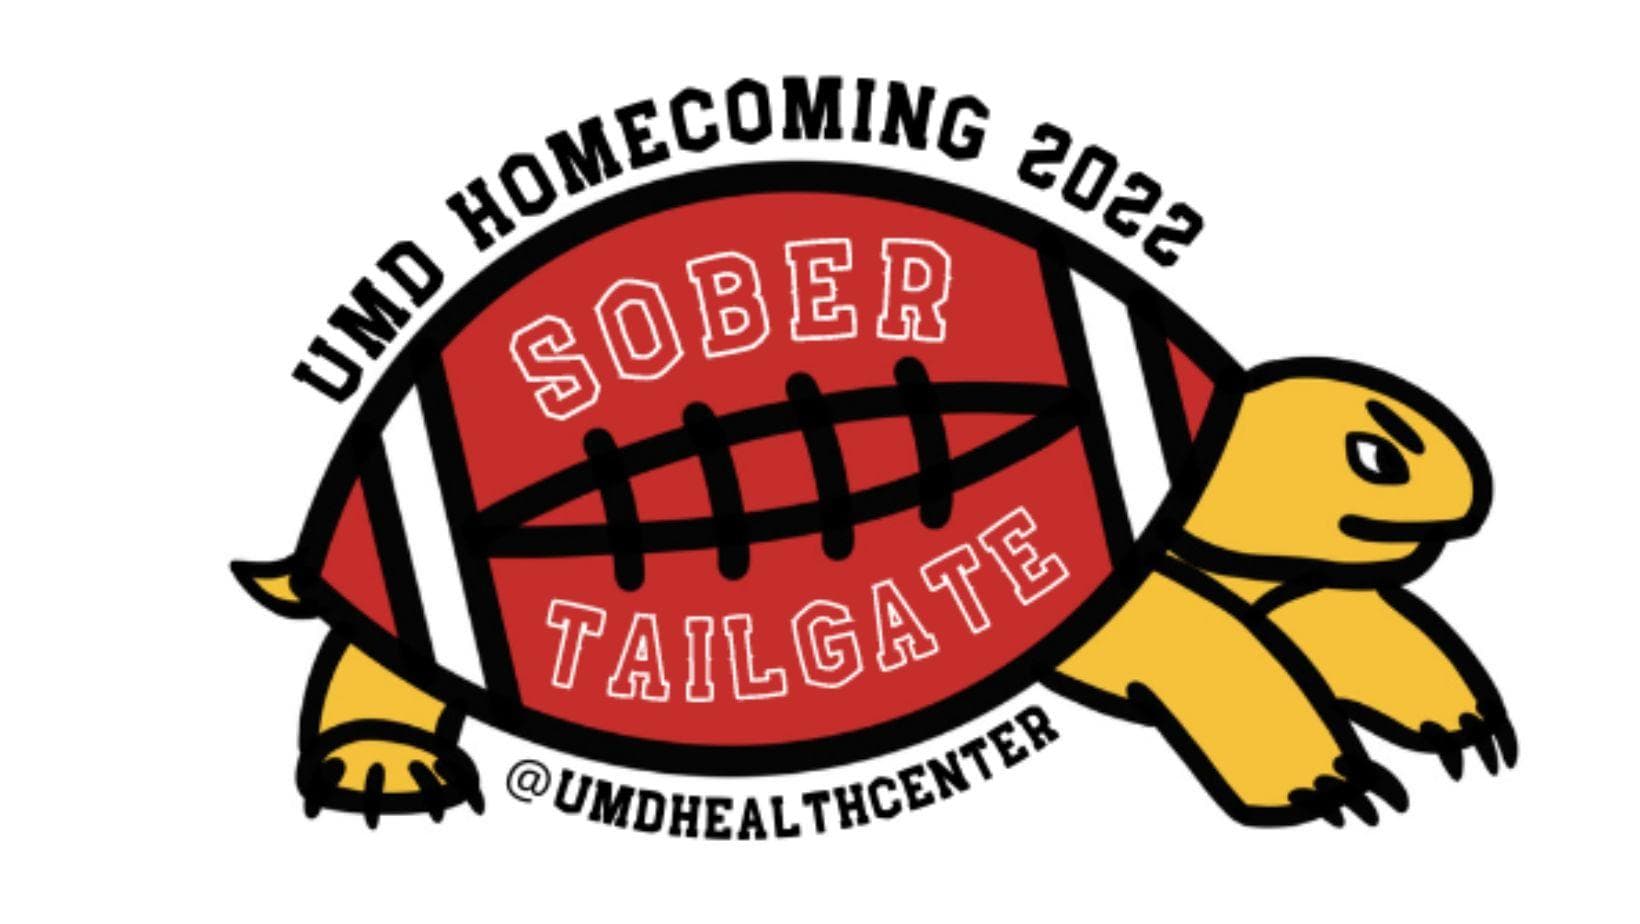 Yellow turtle with red football as its shell - text reads "UMD Homecoming 2022" above the shell, "Sober Tailgate" within the shell, and "@umdhealthcenter" beneath the shell.